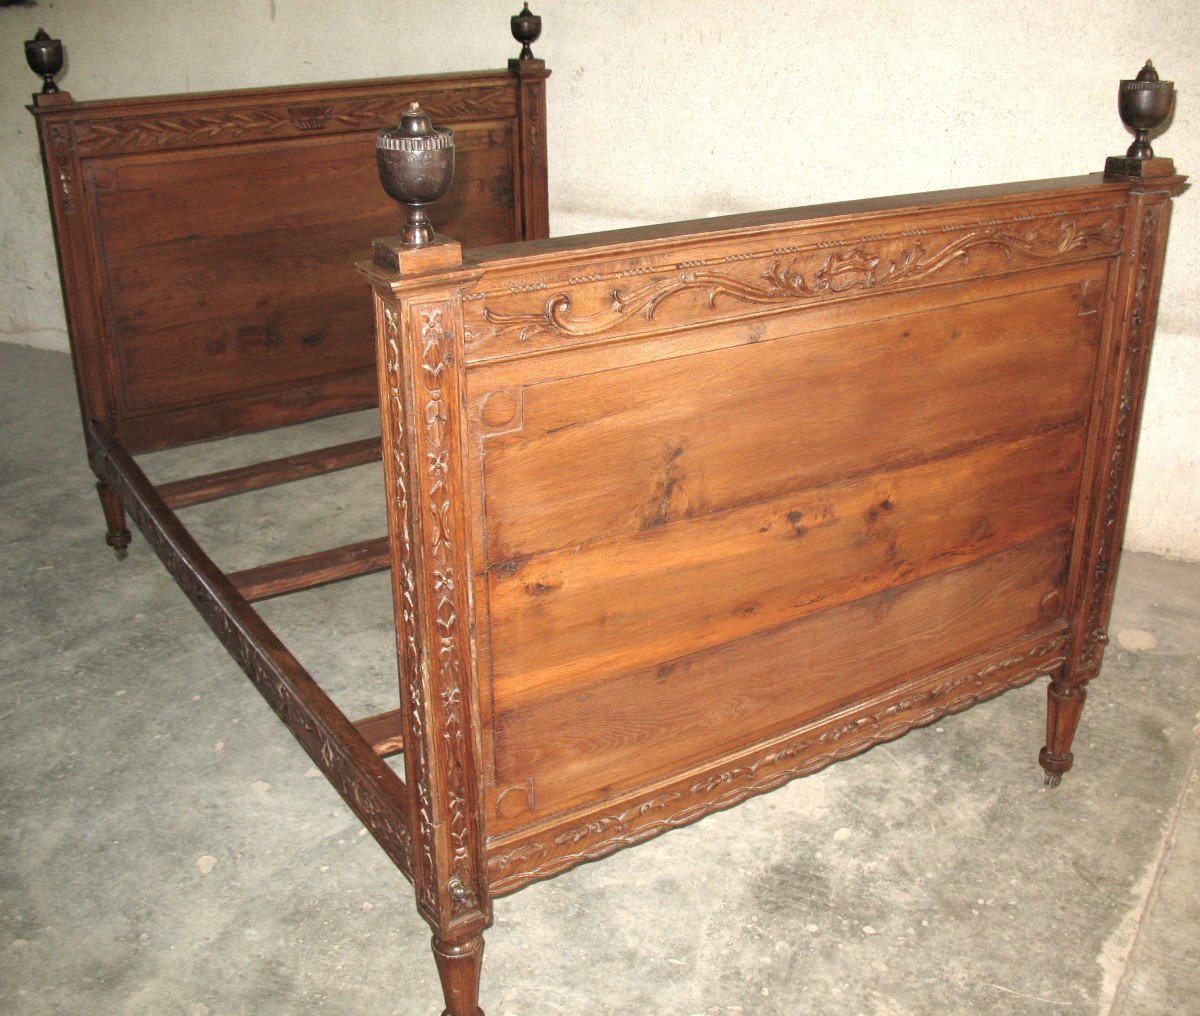 Carved Oak Alcove Bed From The Late 18th Century, Complete With Rails And Casters